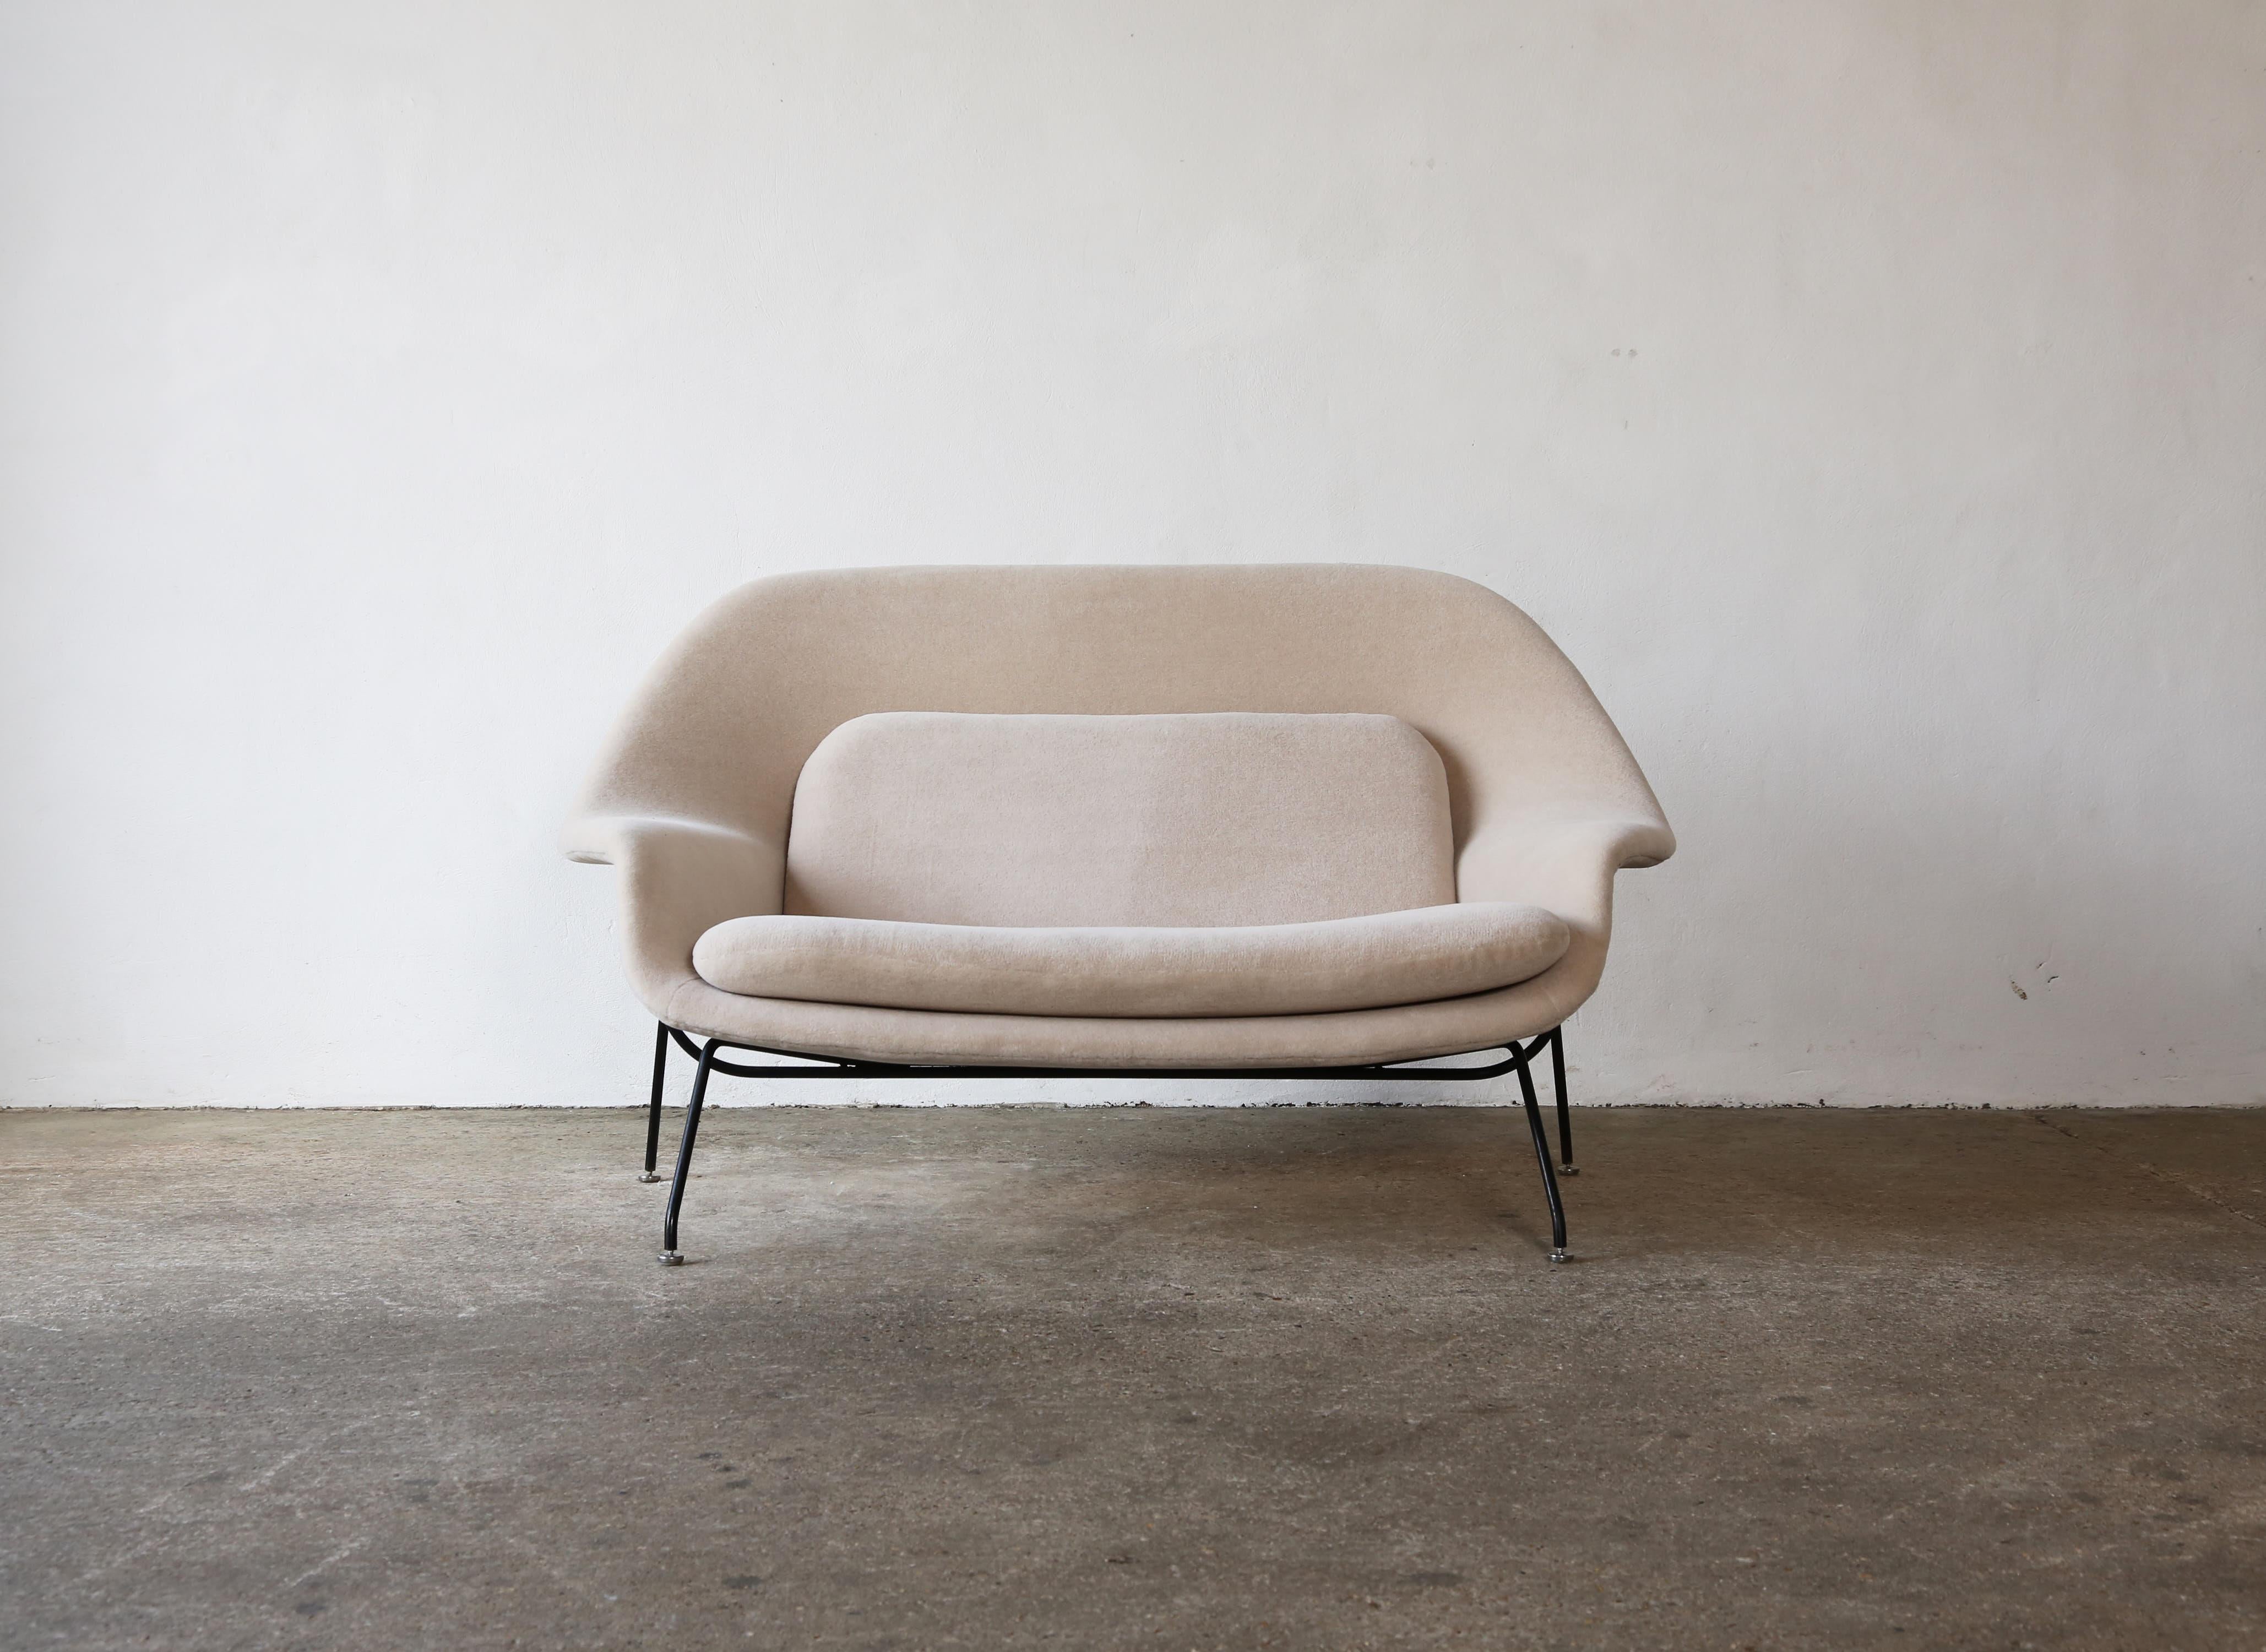 Rare Early Pair of Eero Saarinen Womb Chairs and Ottomans, Knoll, USA, 1950s For Sale 3